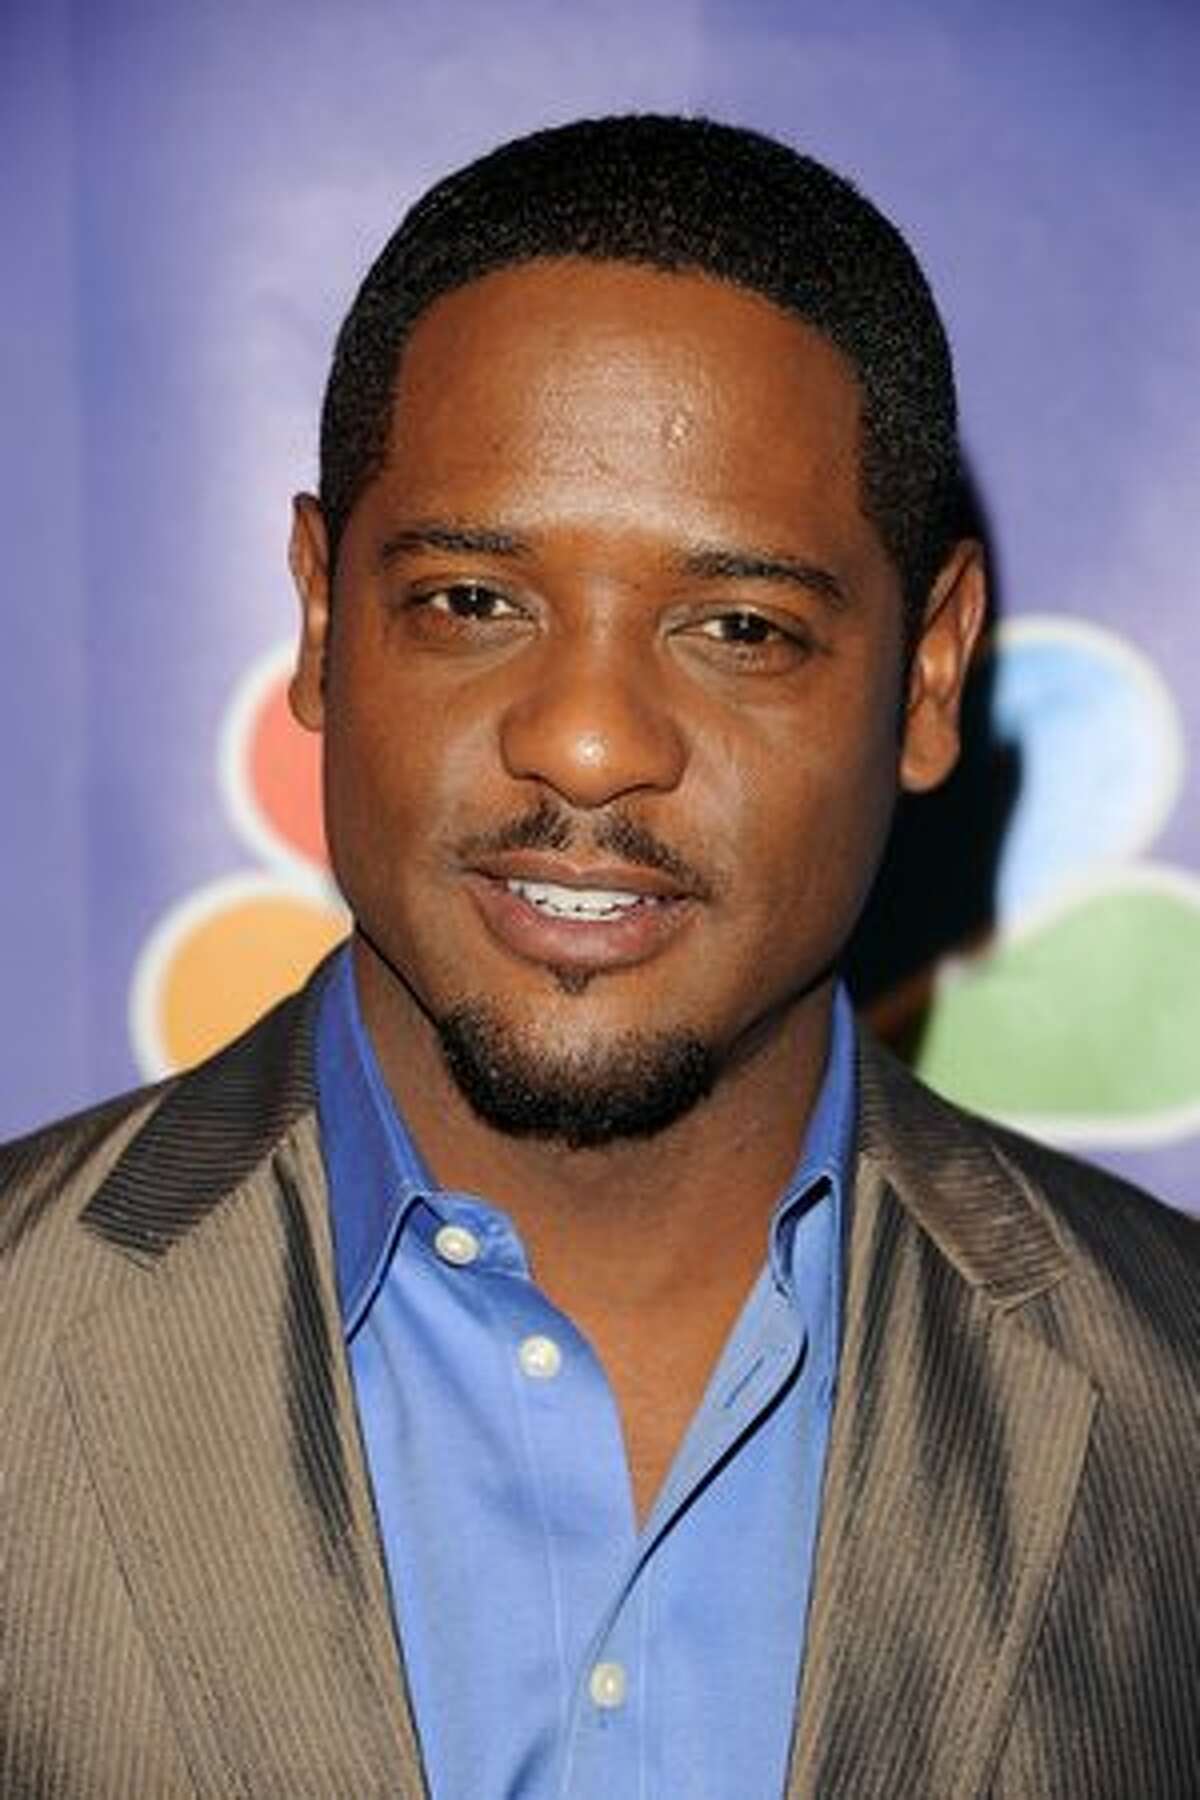 Actor Blair Underwood attends the 2010 NBC "upfront" presentation at The Hilton Hotel in New York on Monday, May 17, 2010.